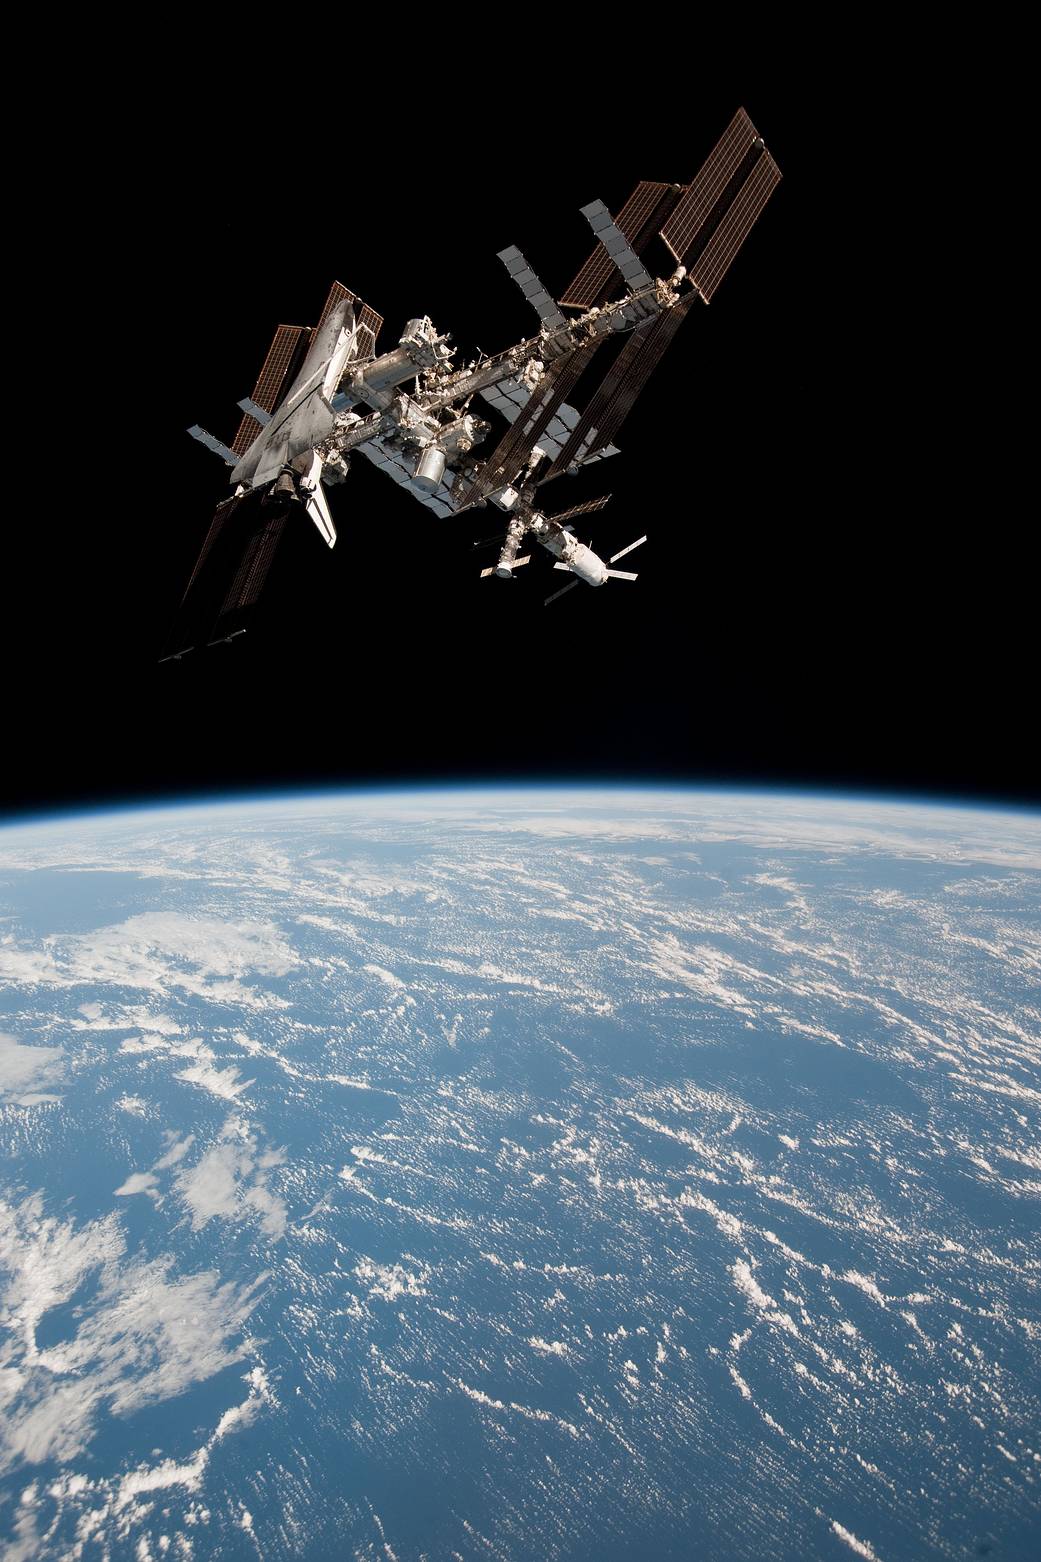 The International Space Station and the Docked Space Shuttle Endeavour